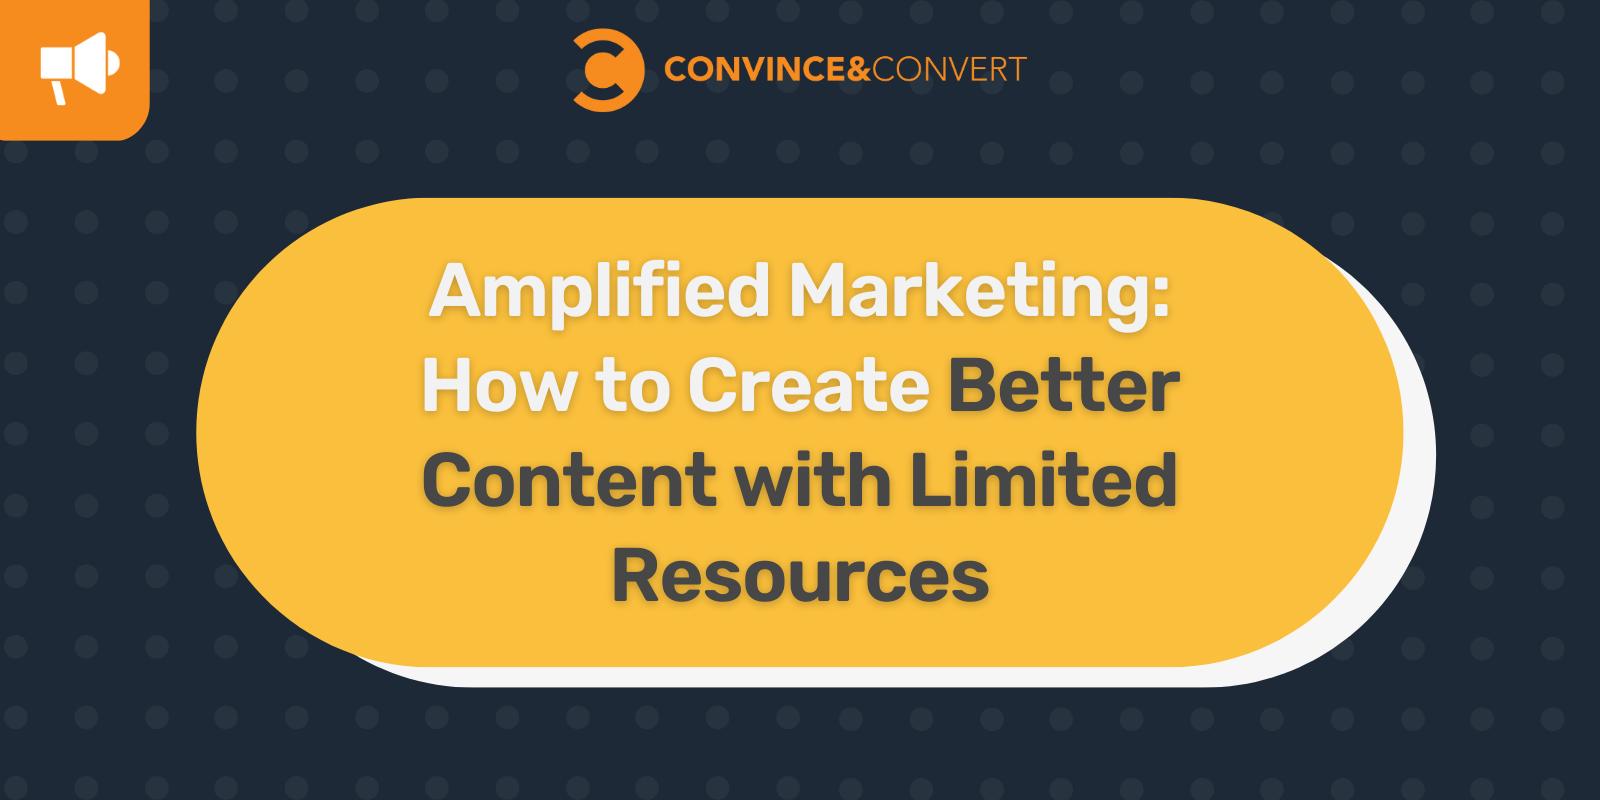 Amplified Marketing: How to Create Better Content with Limited Resources